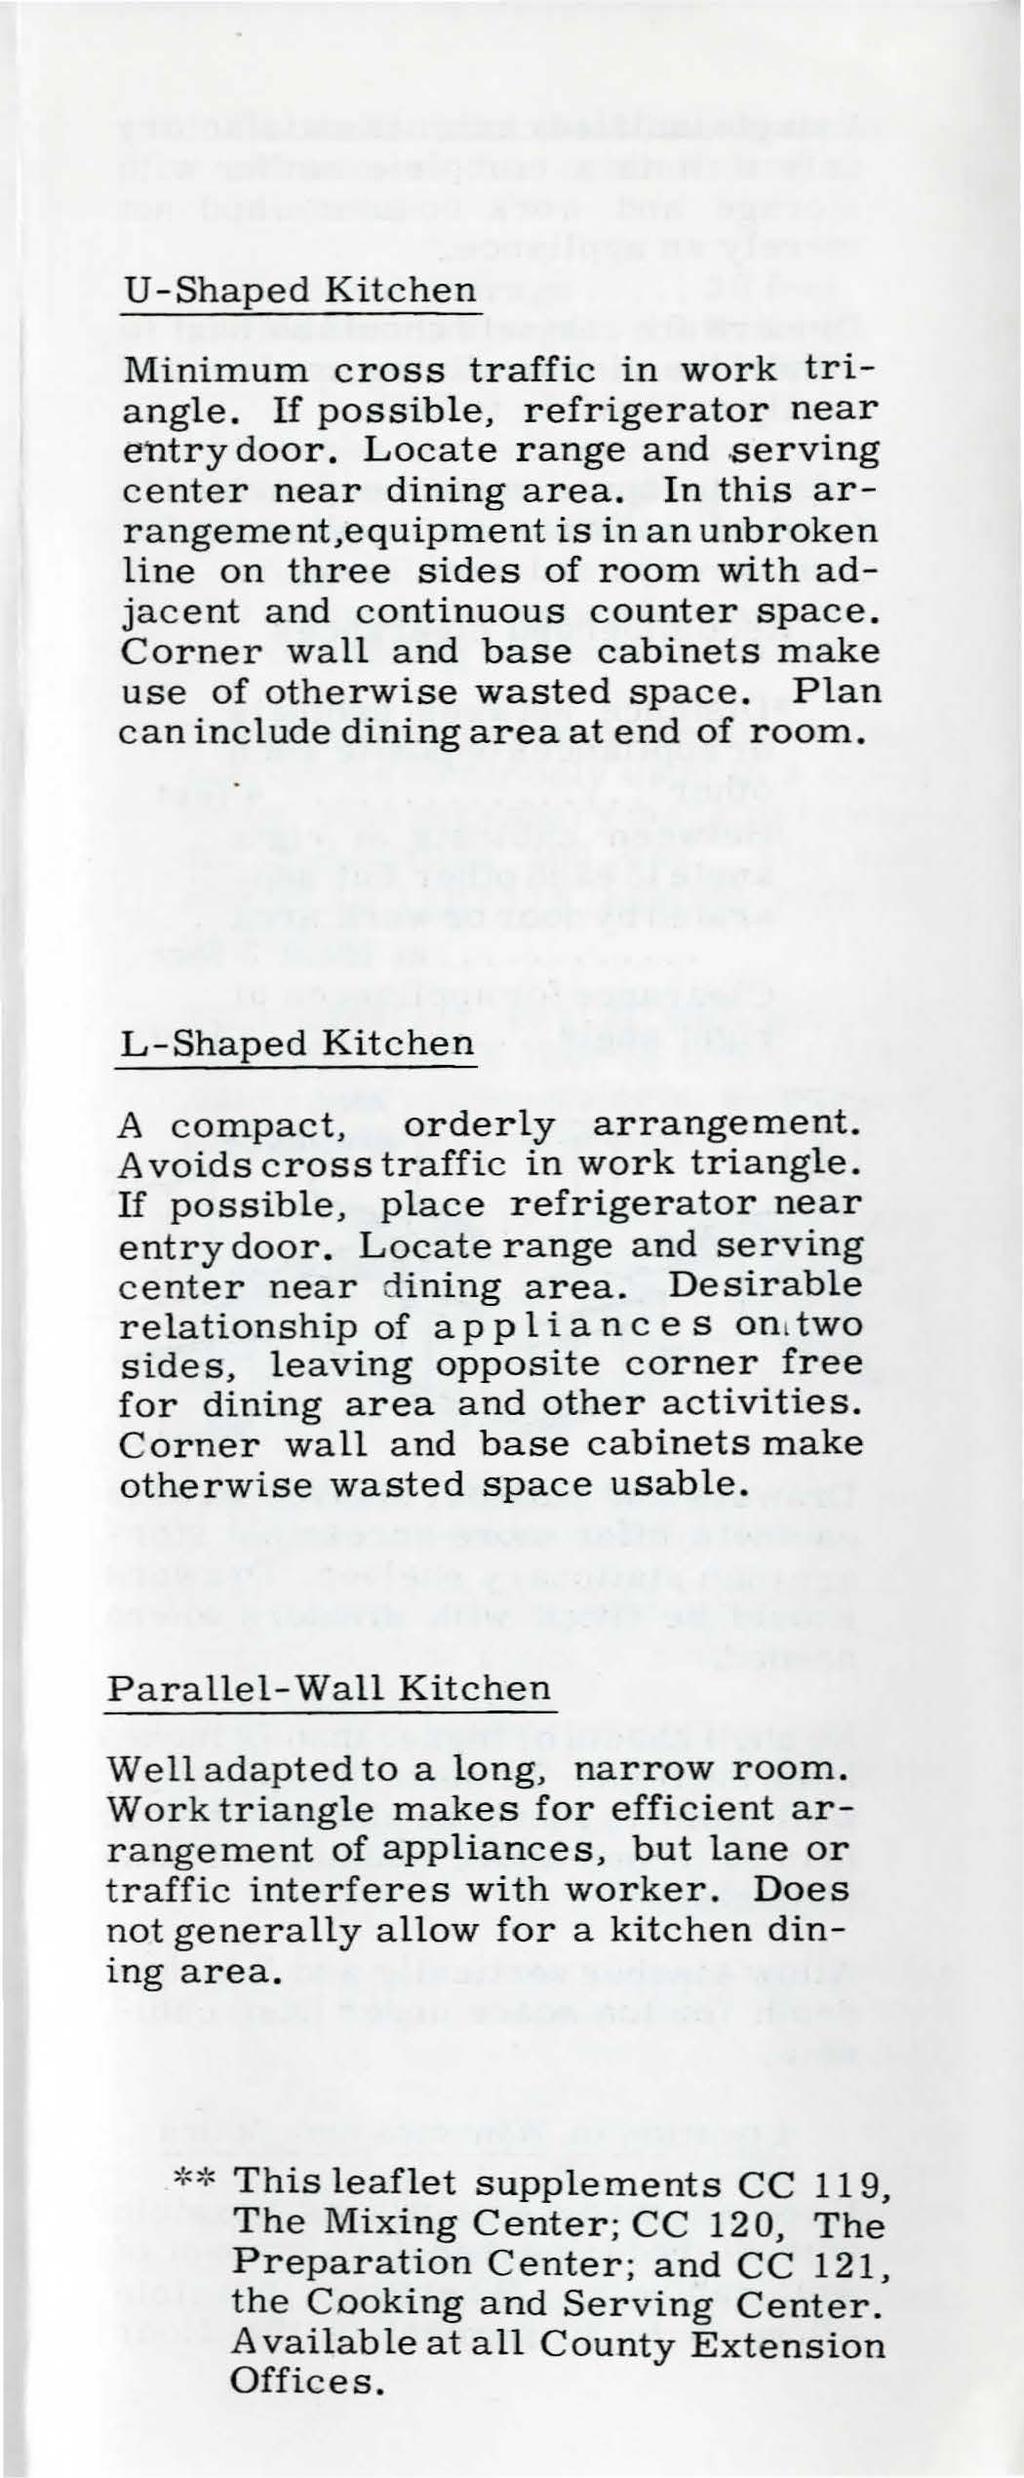 U-Shaped Kitchen Minimum cross traffic in work triangle. If possible, refrigerator near entry door. Locate range and serving center near dining area.